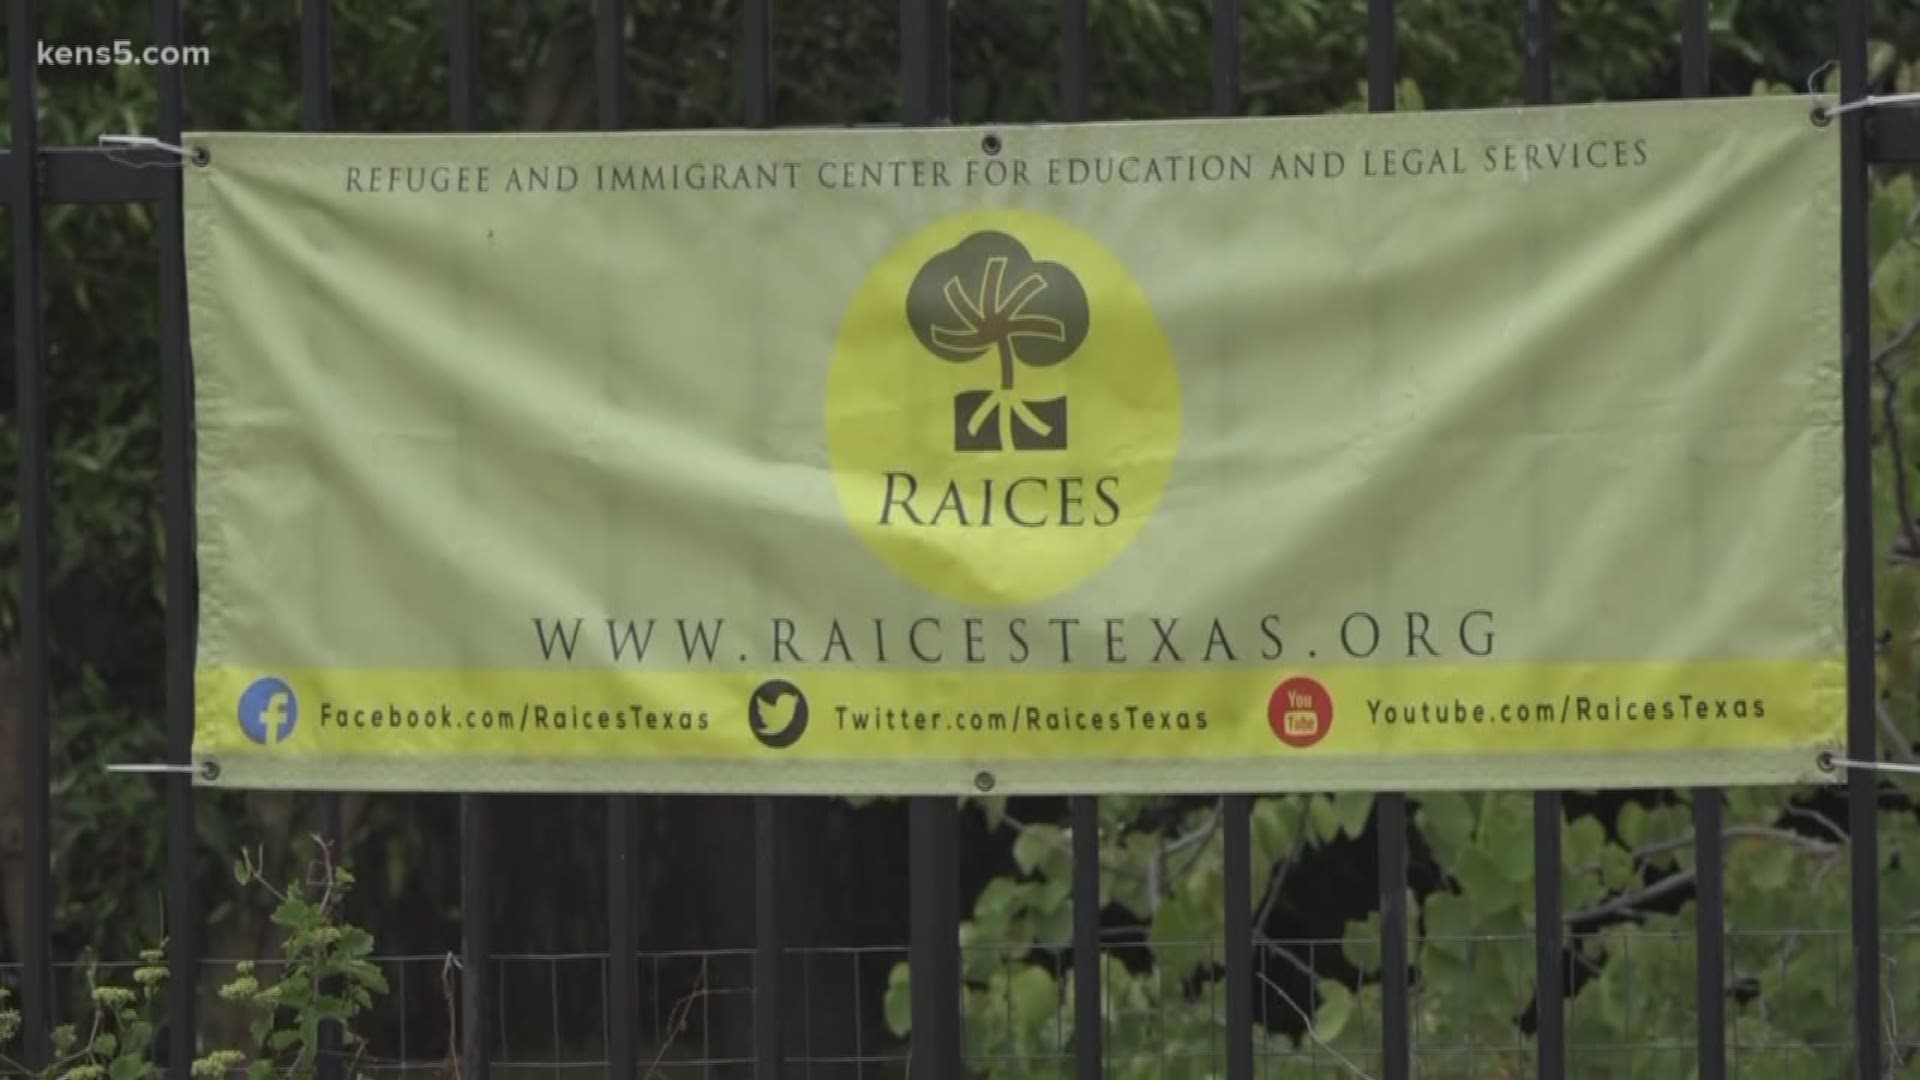 In just a matter of days, RAICES raised millions of dollars to help reunite separated families.